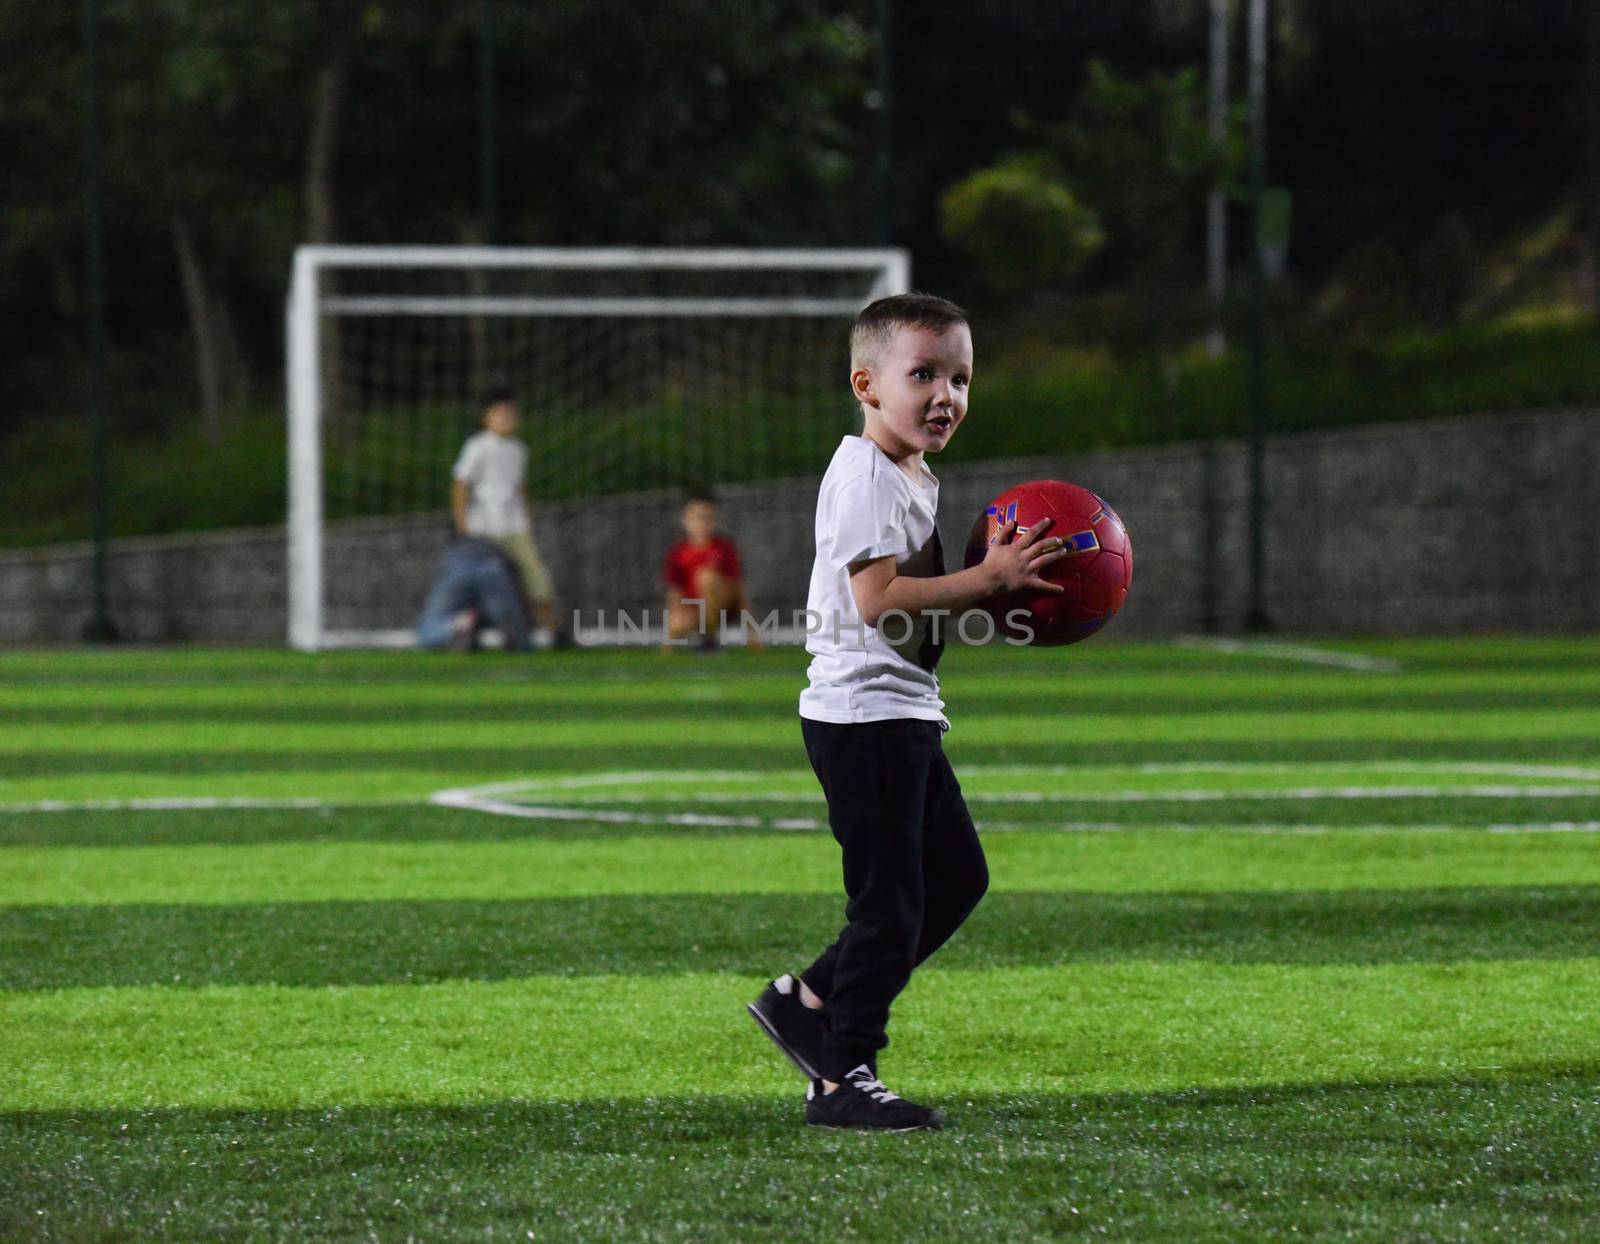 active child is playing with a red ball on the football field, night time